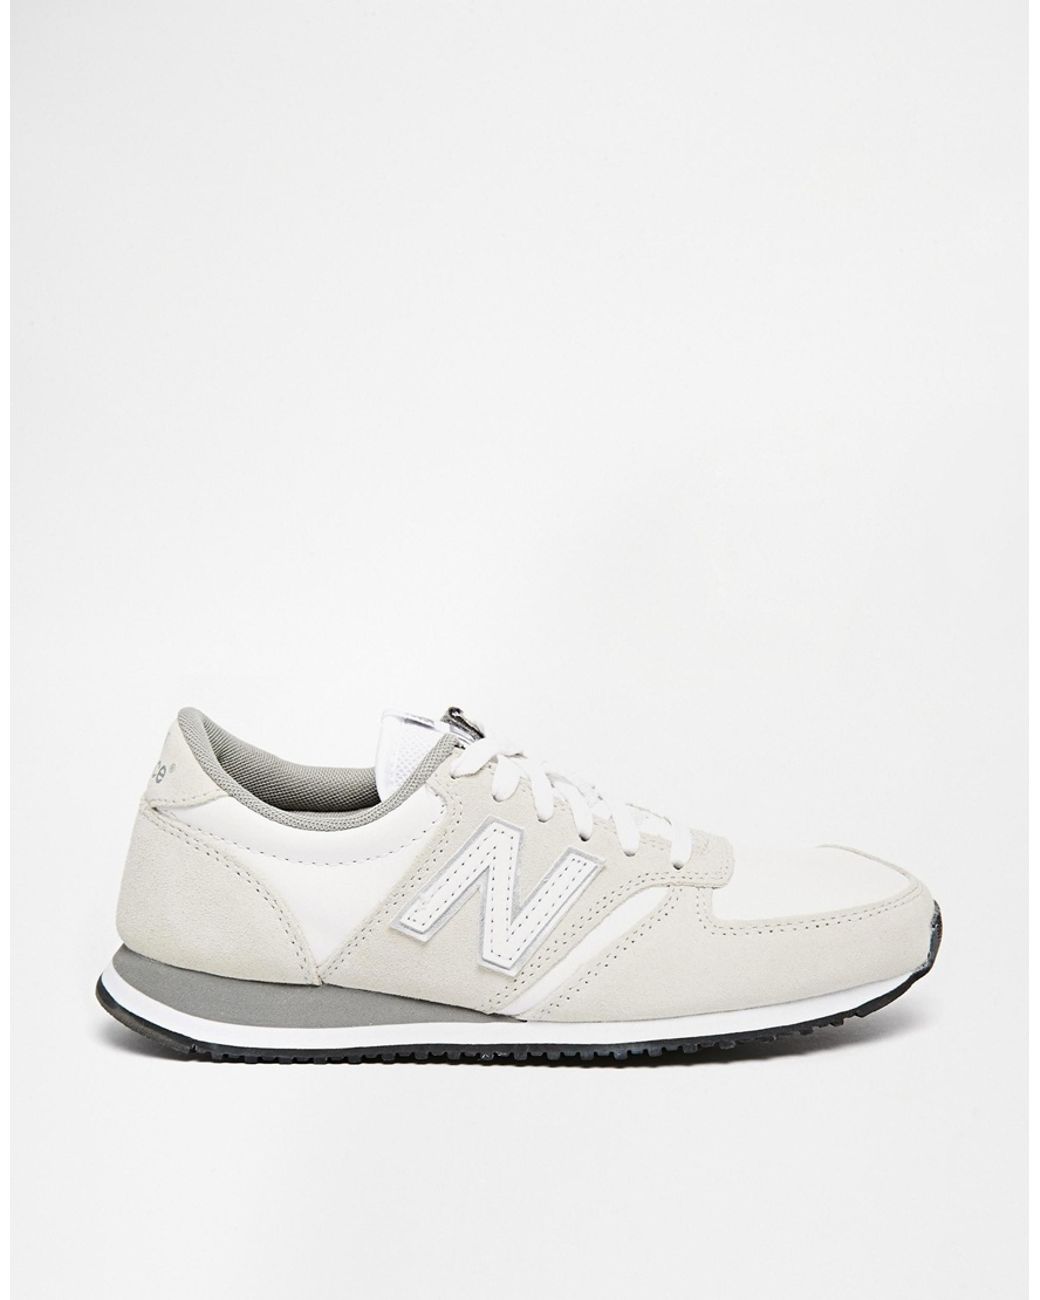 New Balance 420 Suede Low-Top Sneakers in Cream (Natural) | Lyst